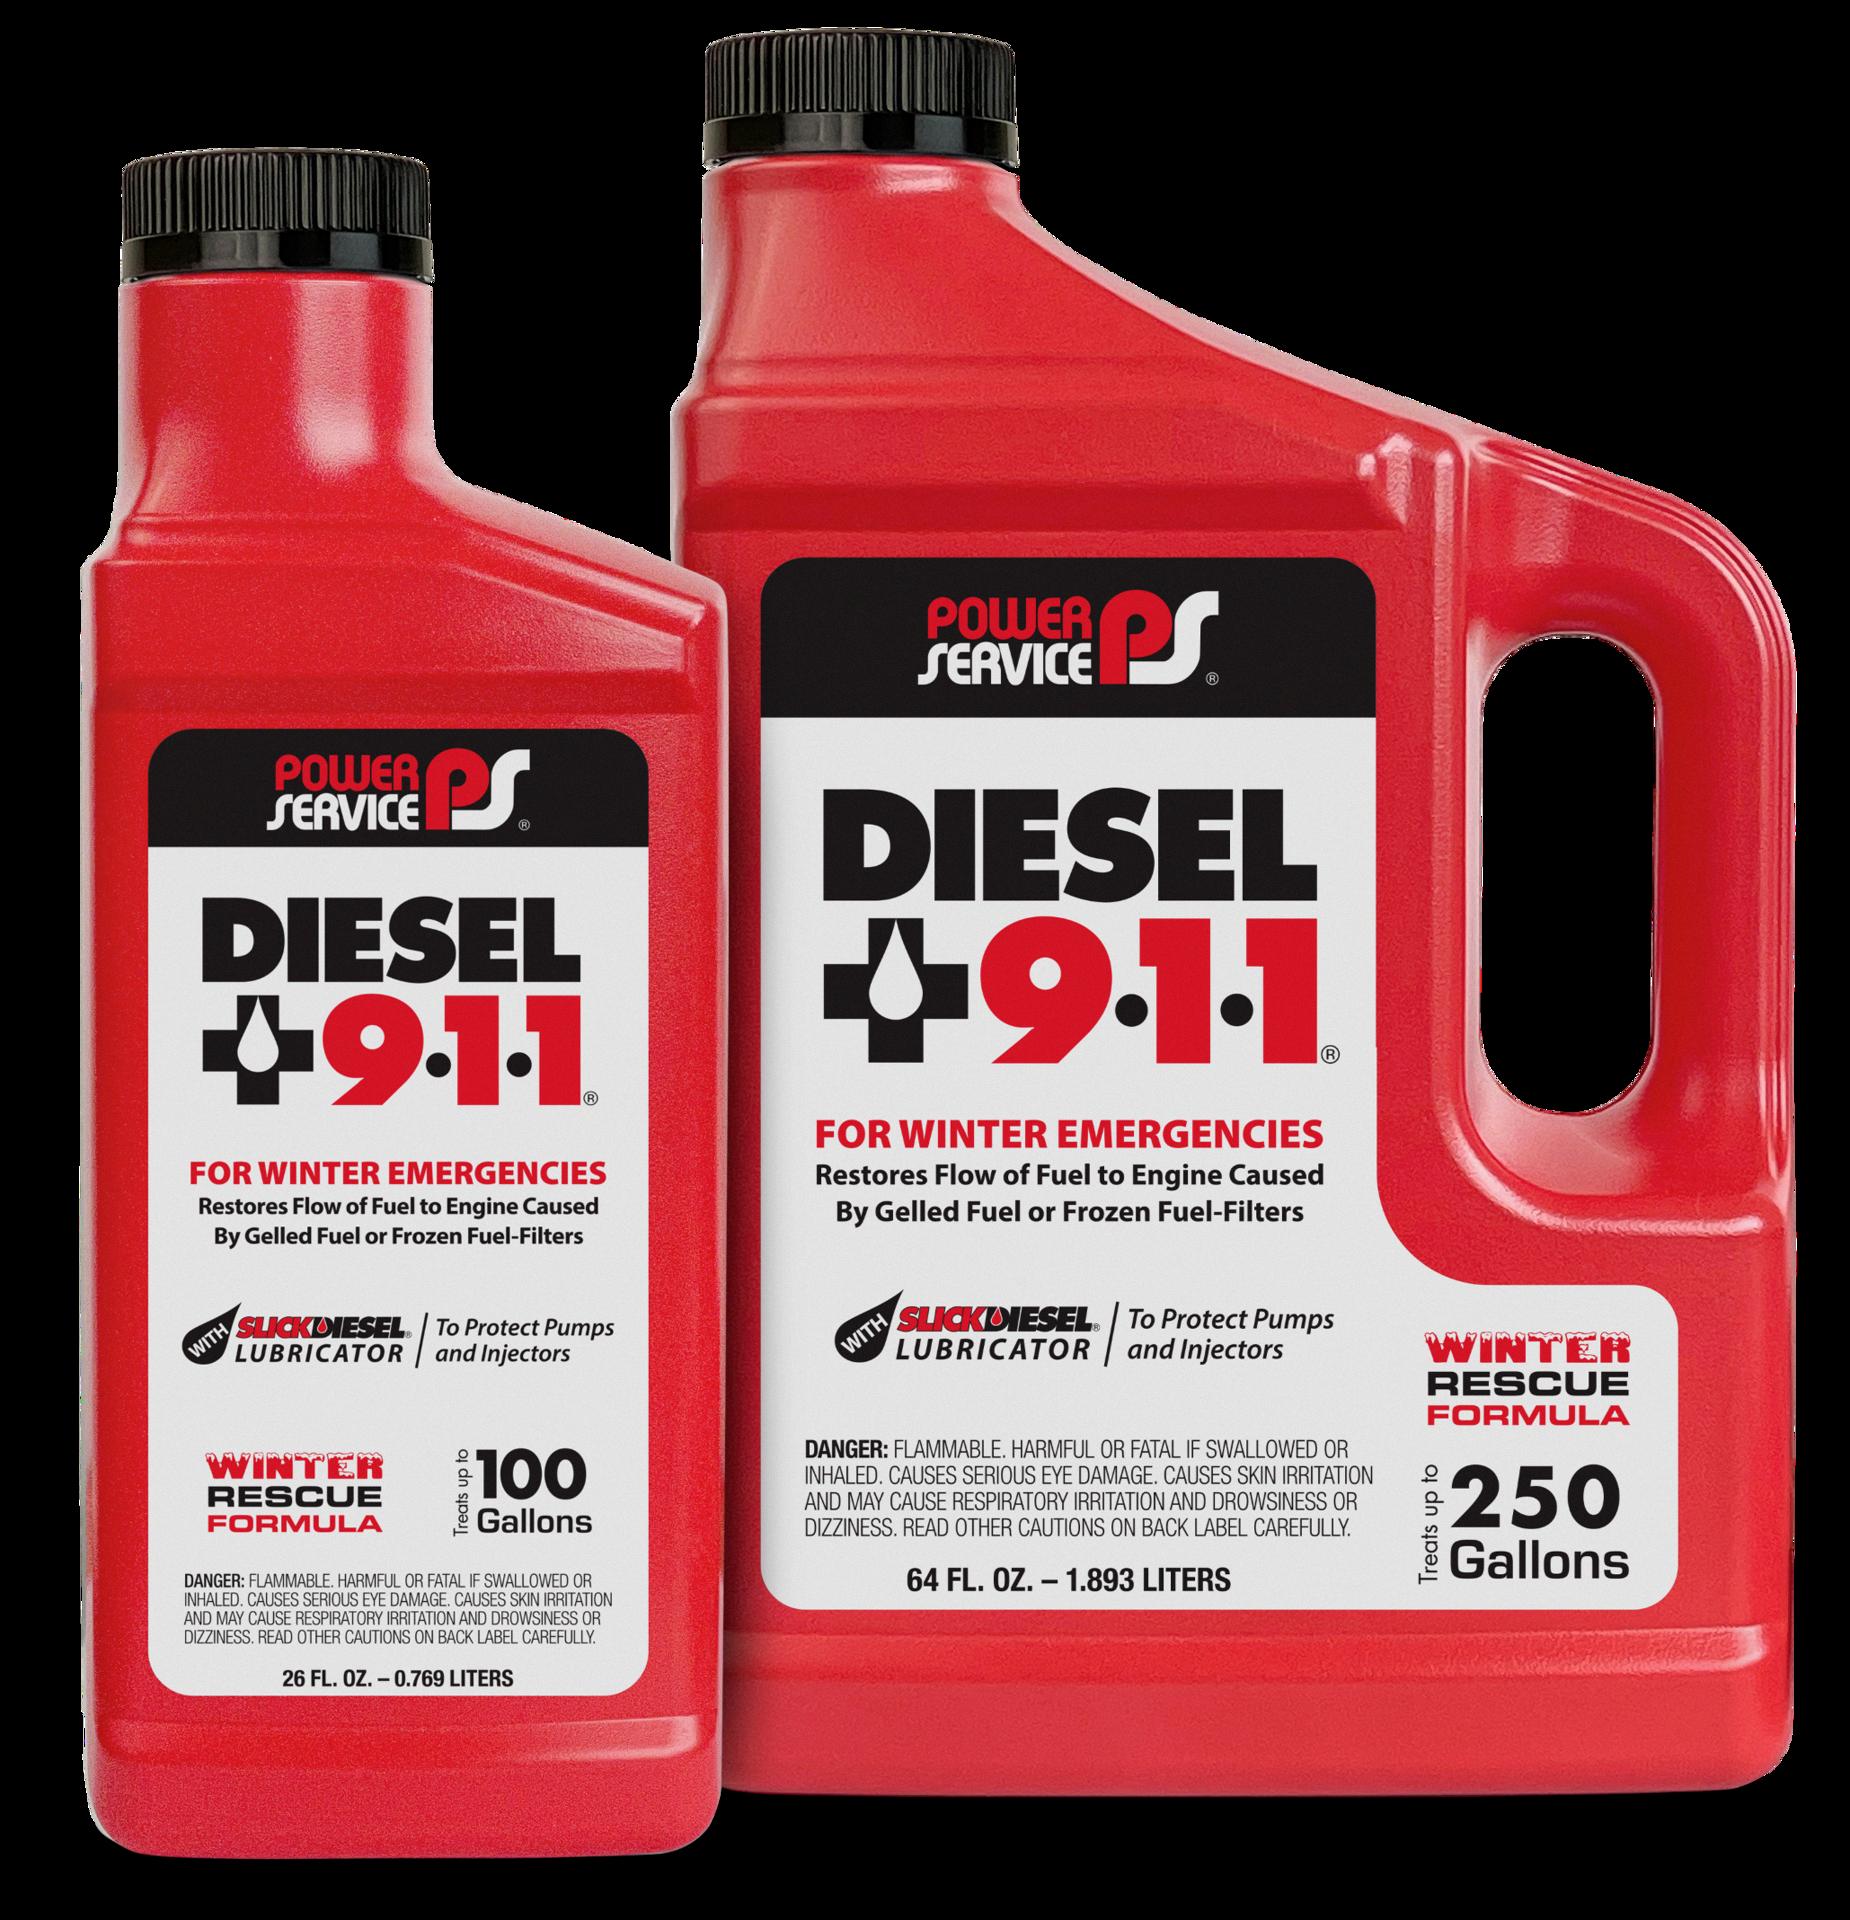 how long does diesel 911 take to work